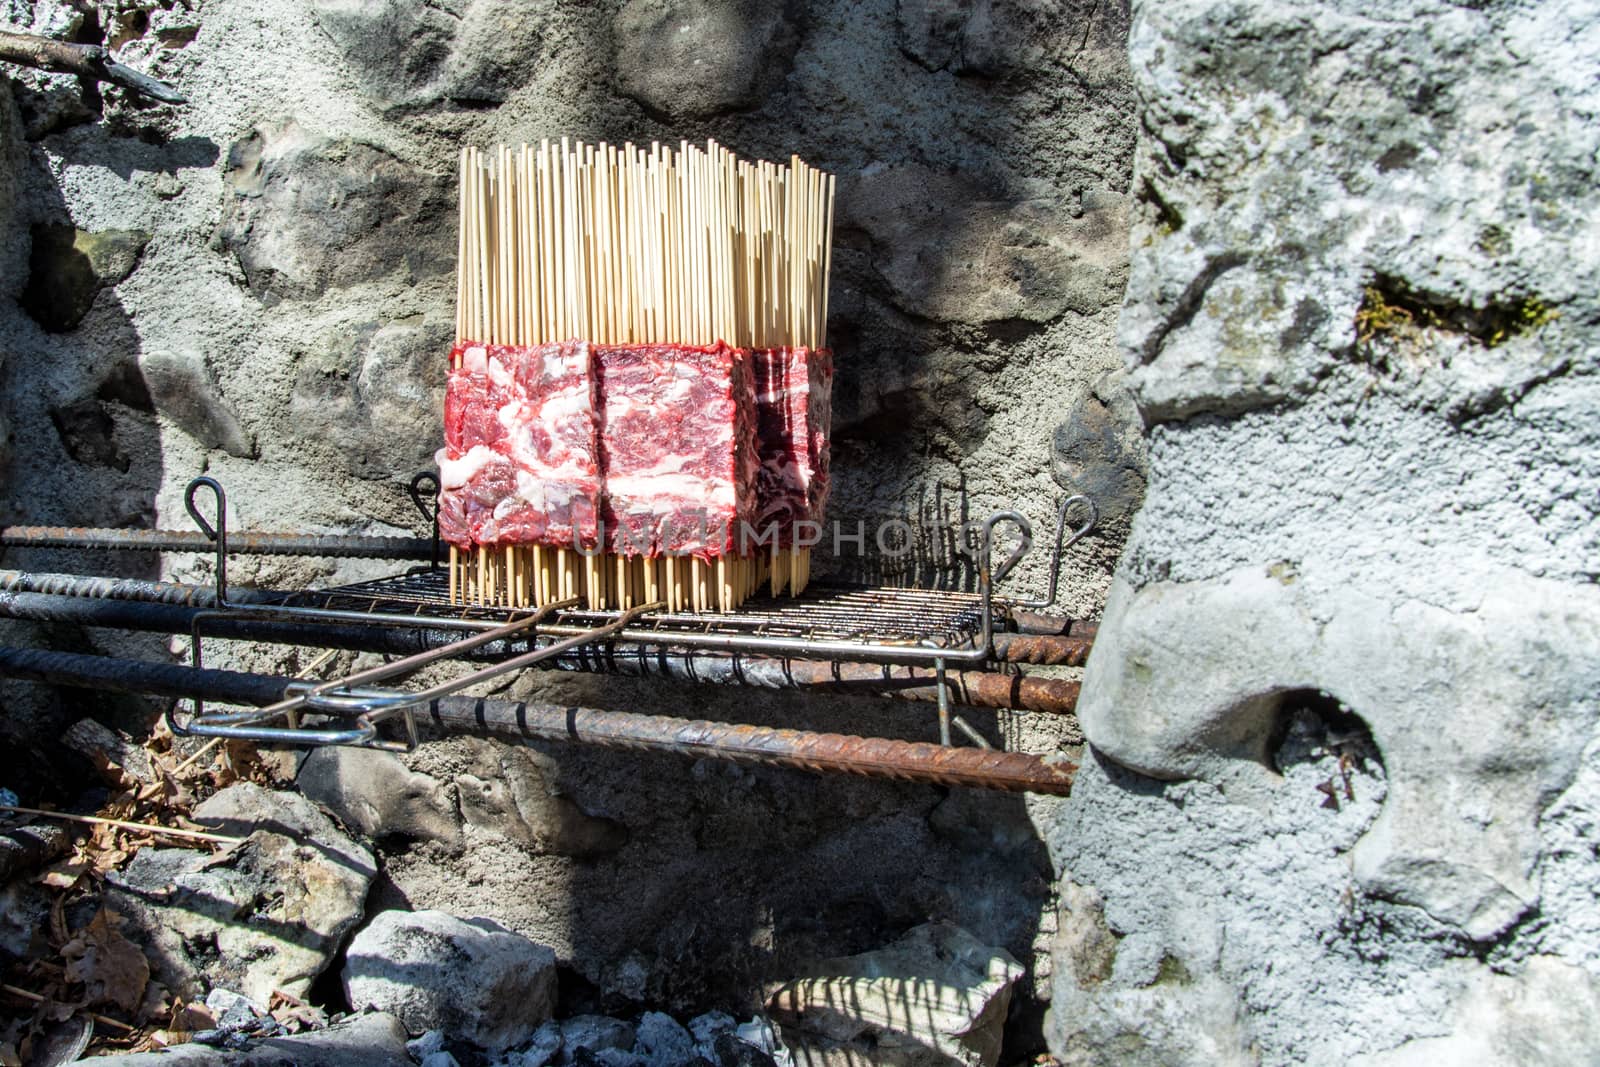 Arrosticini on the grill vertical cooking, Abruzzi skewers of sheep.